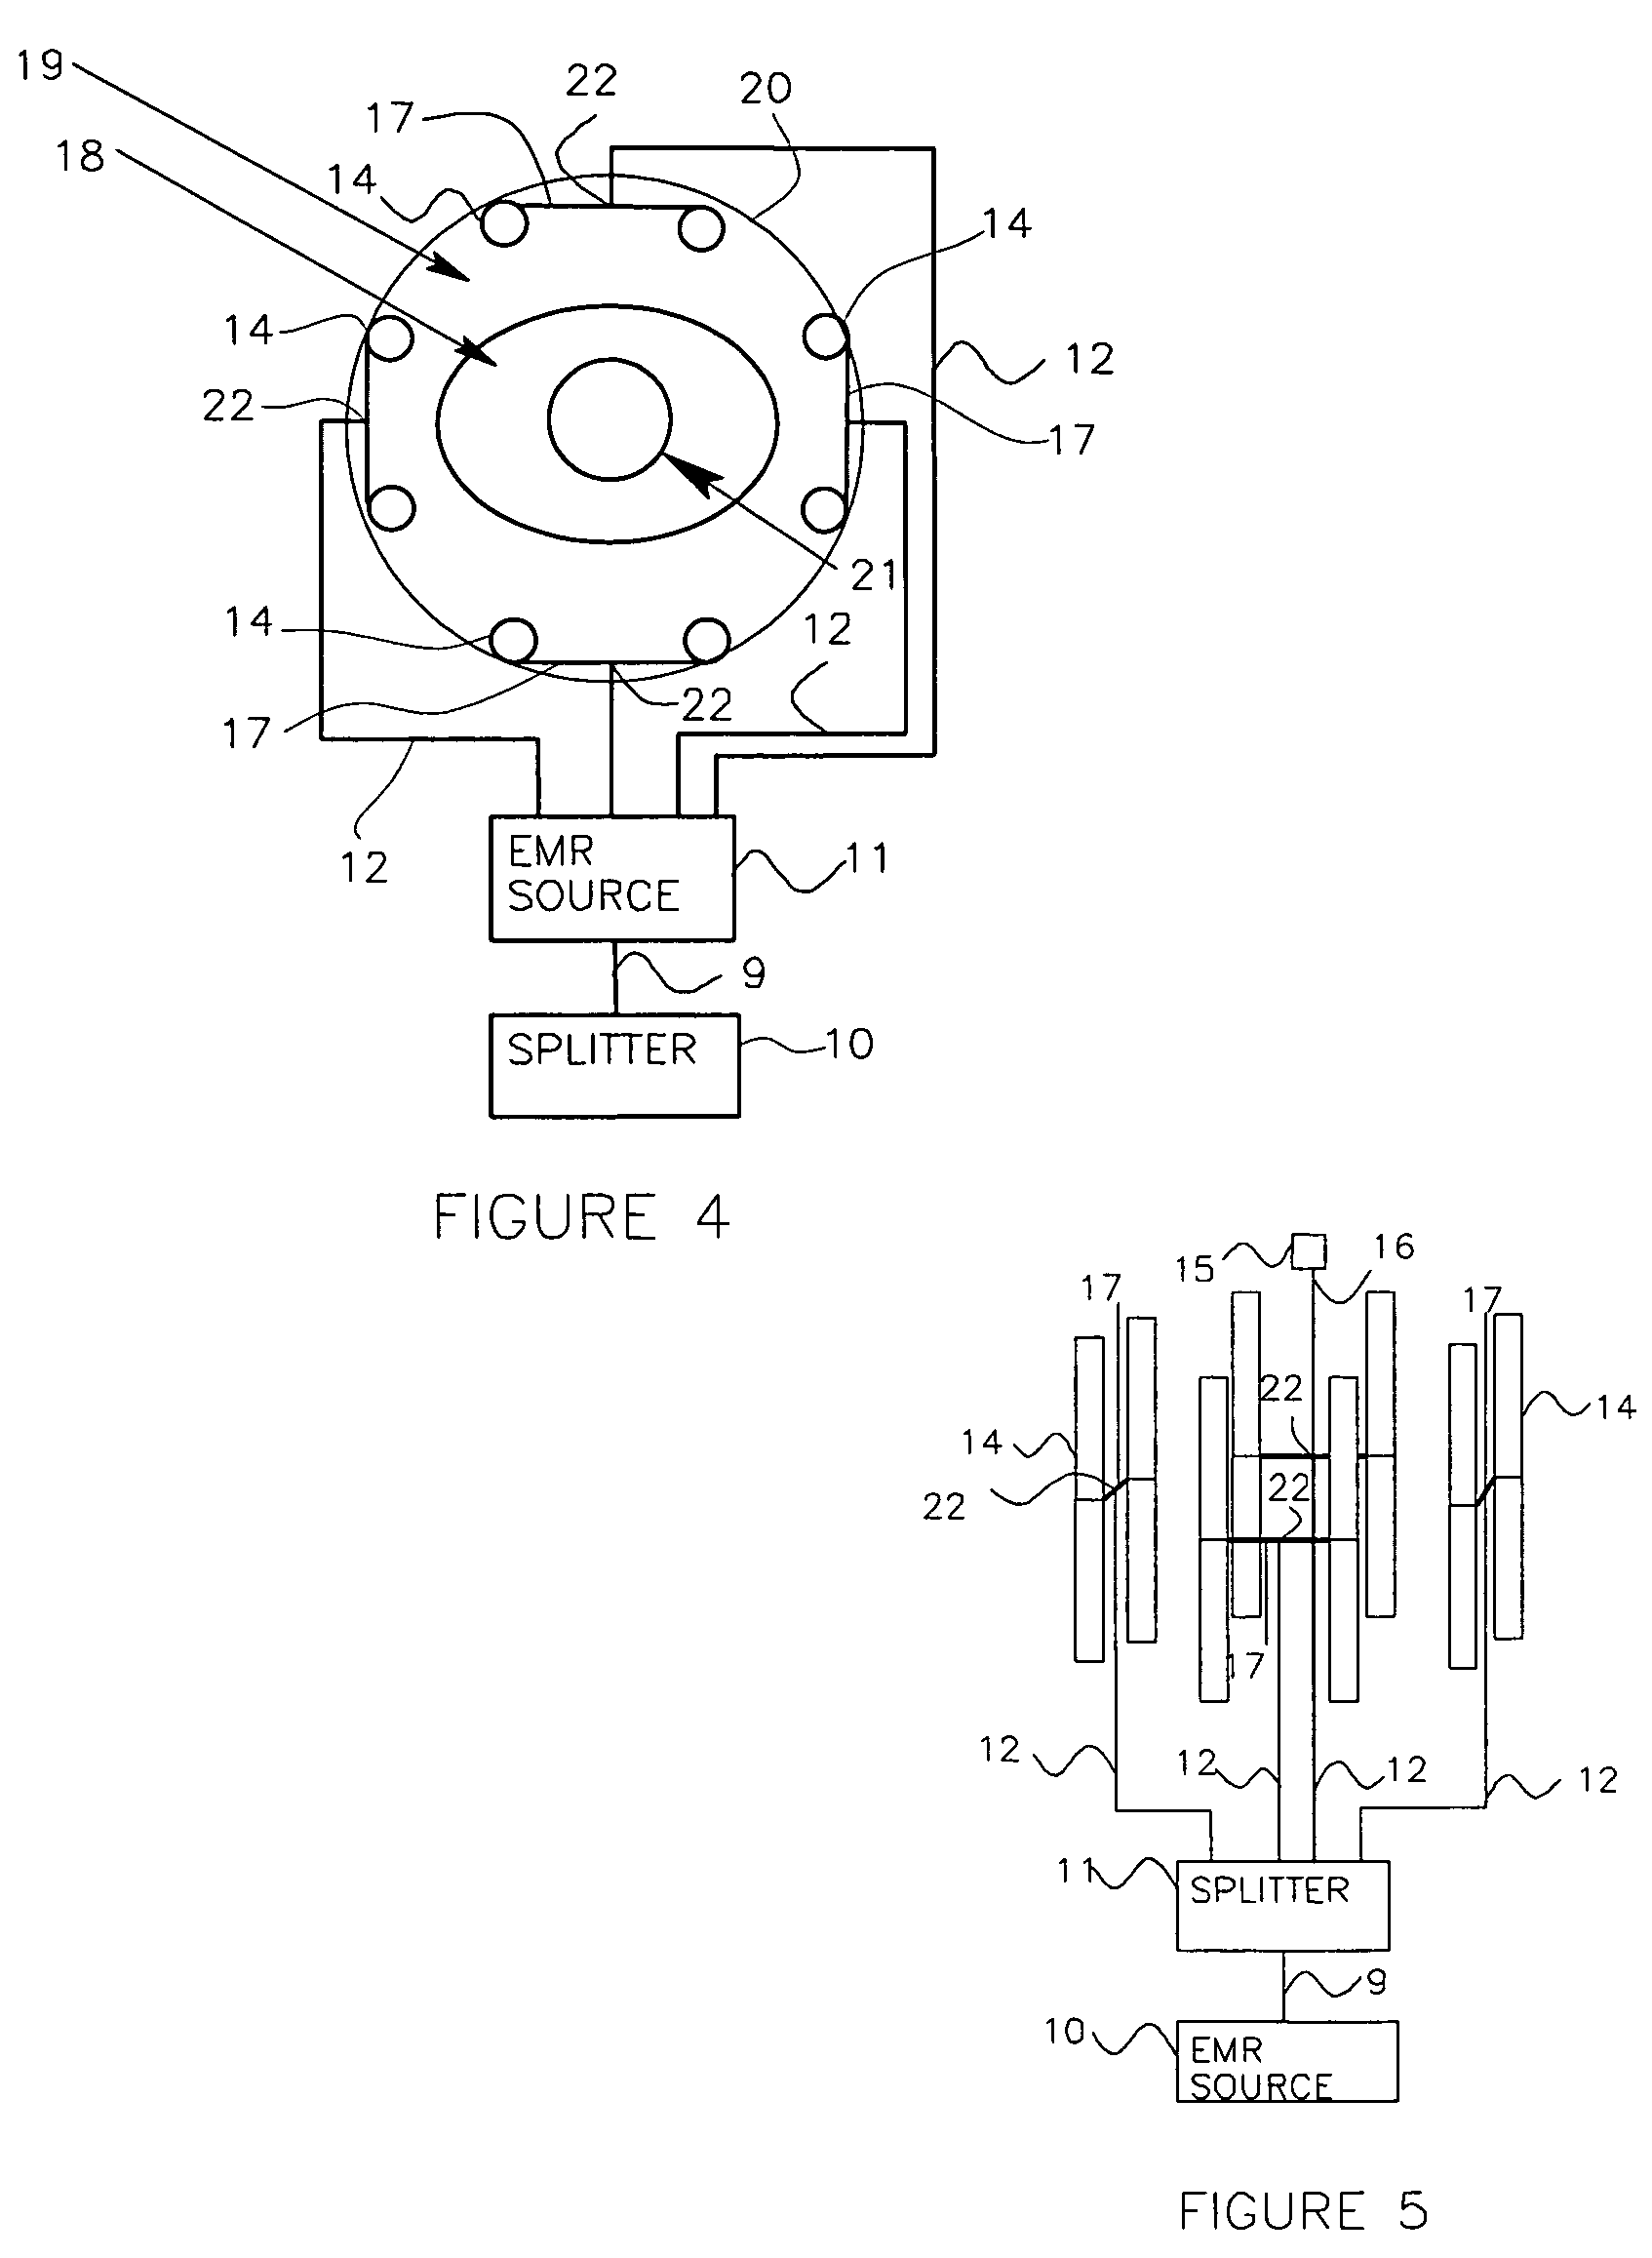 Apparatus for creating hyperthermia in tissue